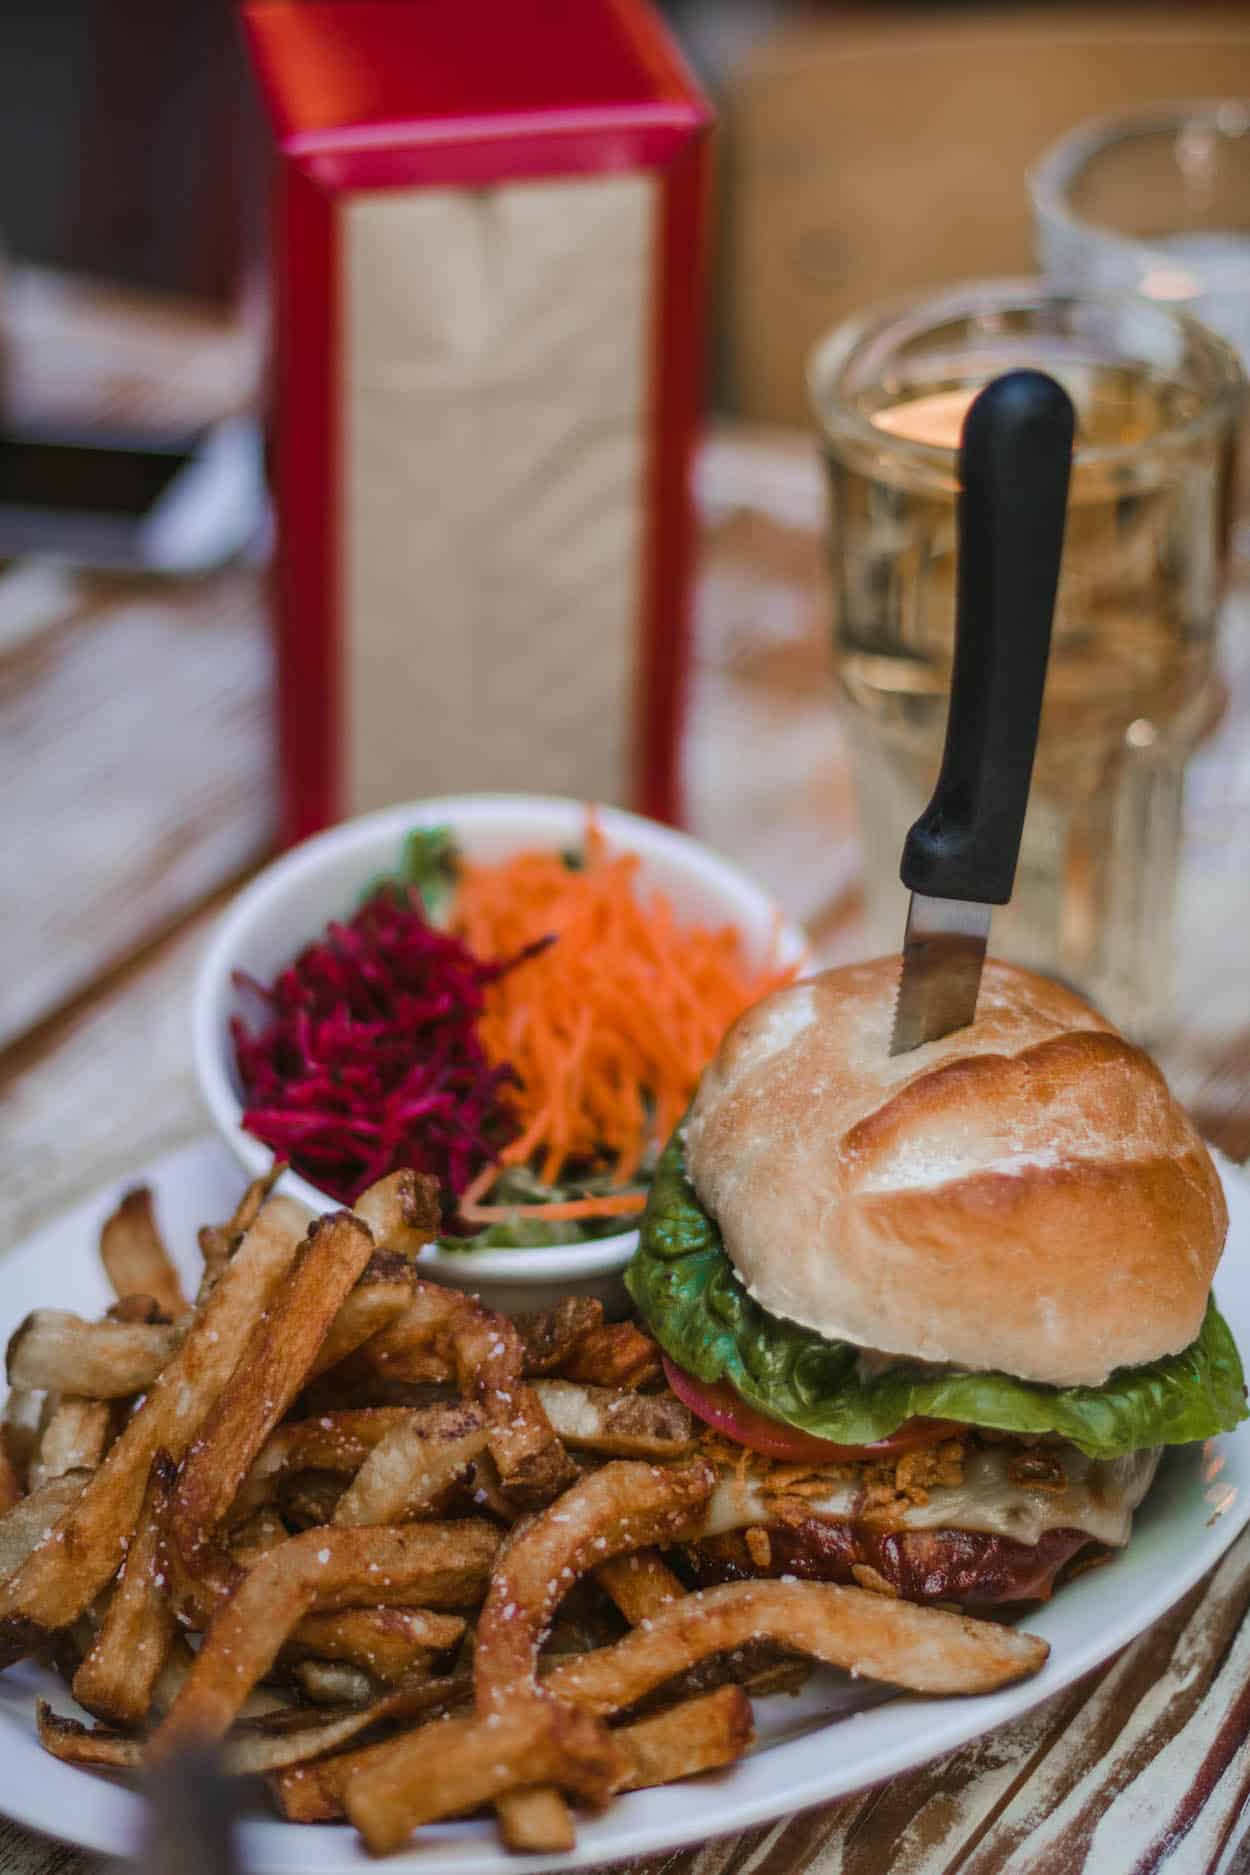 Meet is a plant-based restaurant in Vancouver.